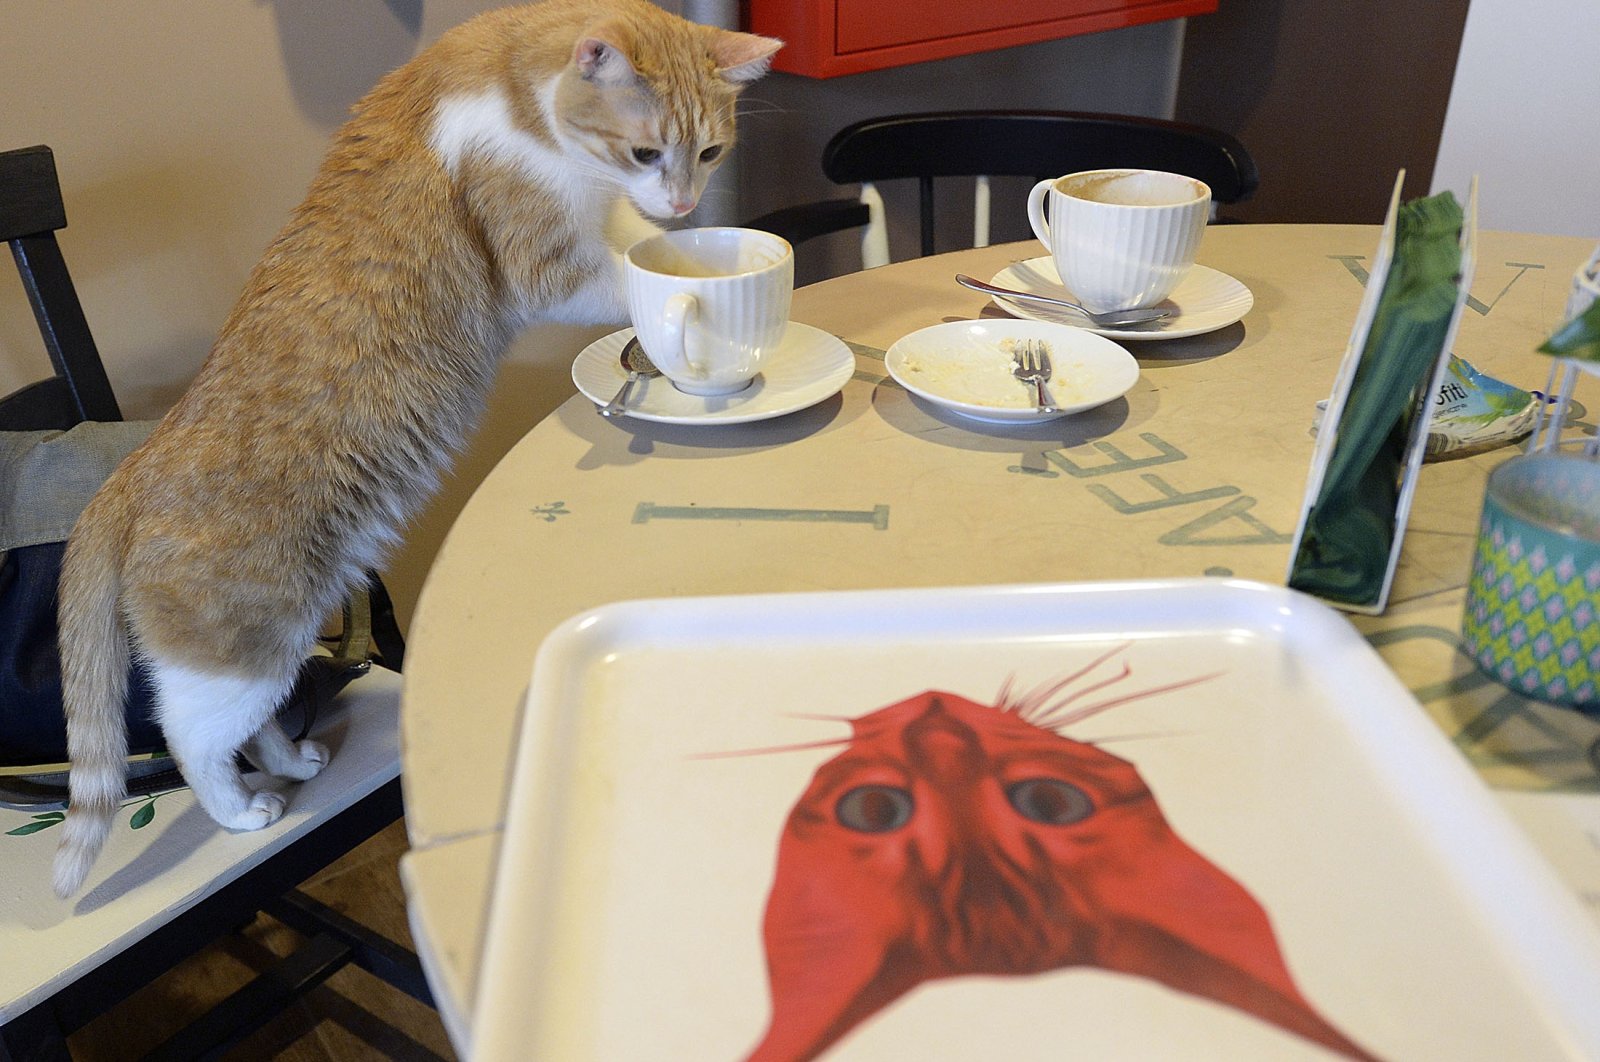 One of seven cats that keep the company of the visitors at a new &quot;Miau Cafe&quot; finishes a cake in Warsaw, Poland, Jan. 13, 2018. (AP Photo)